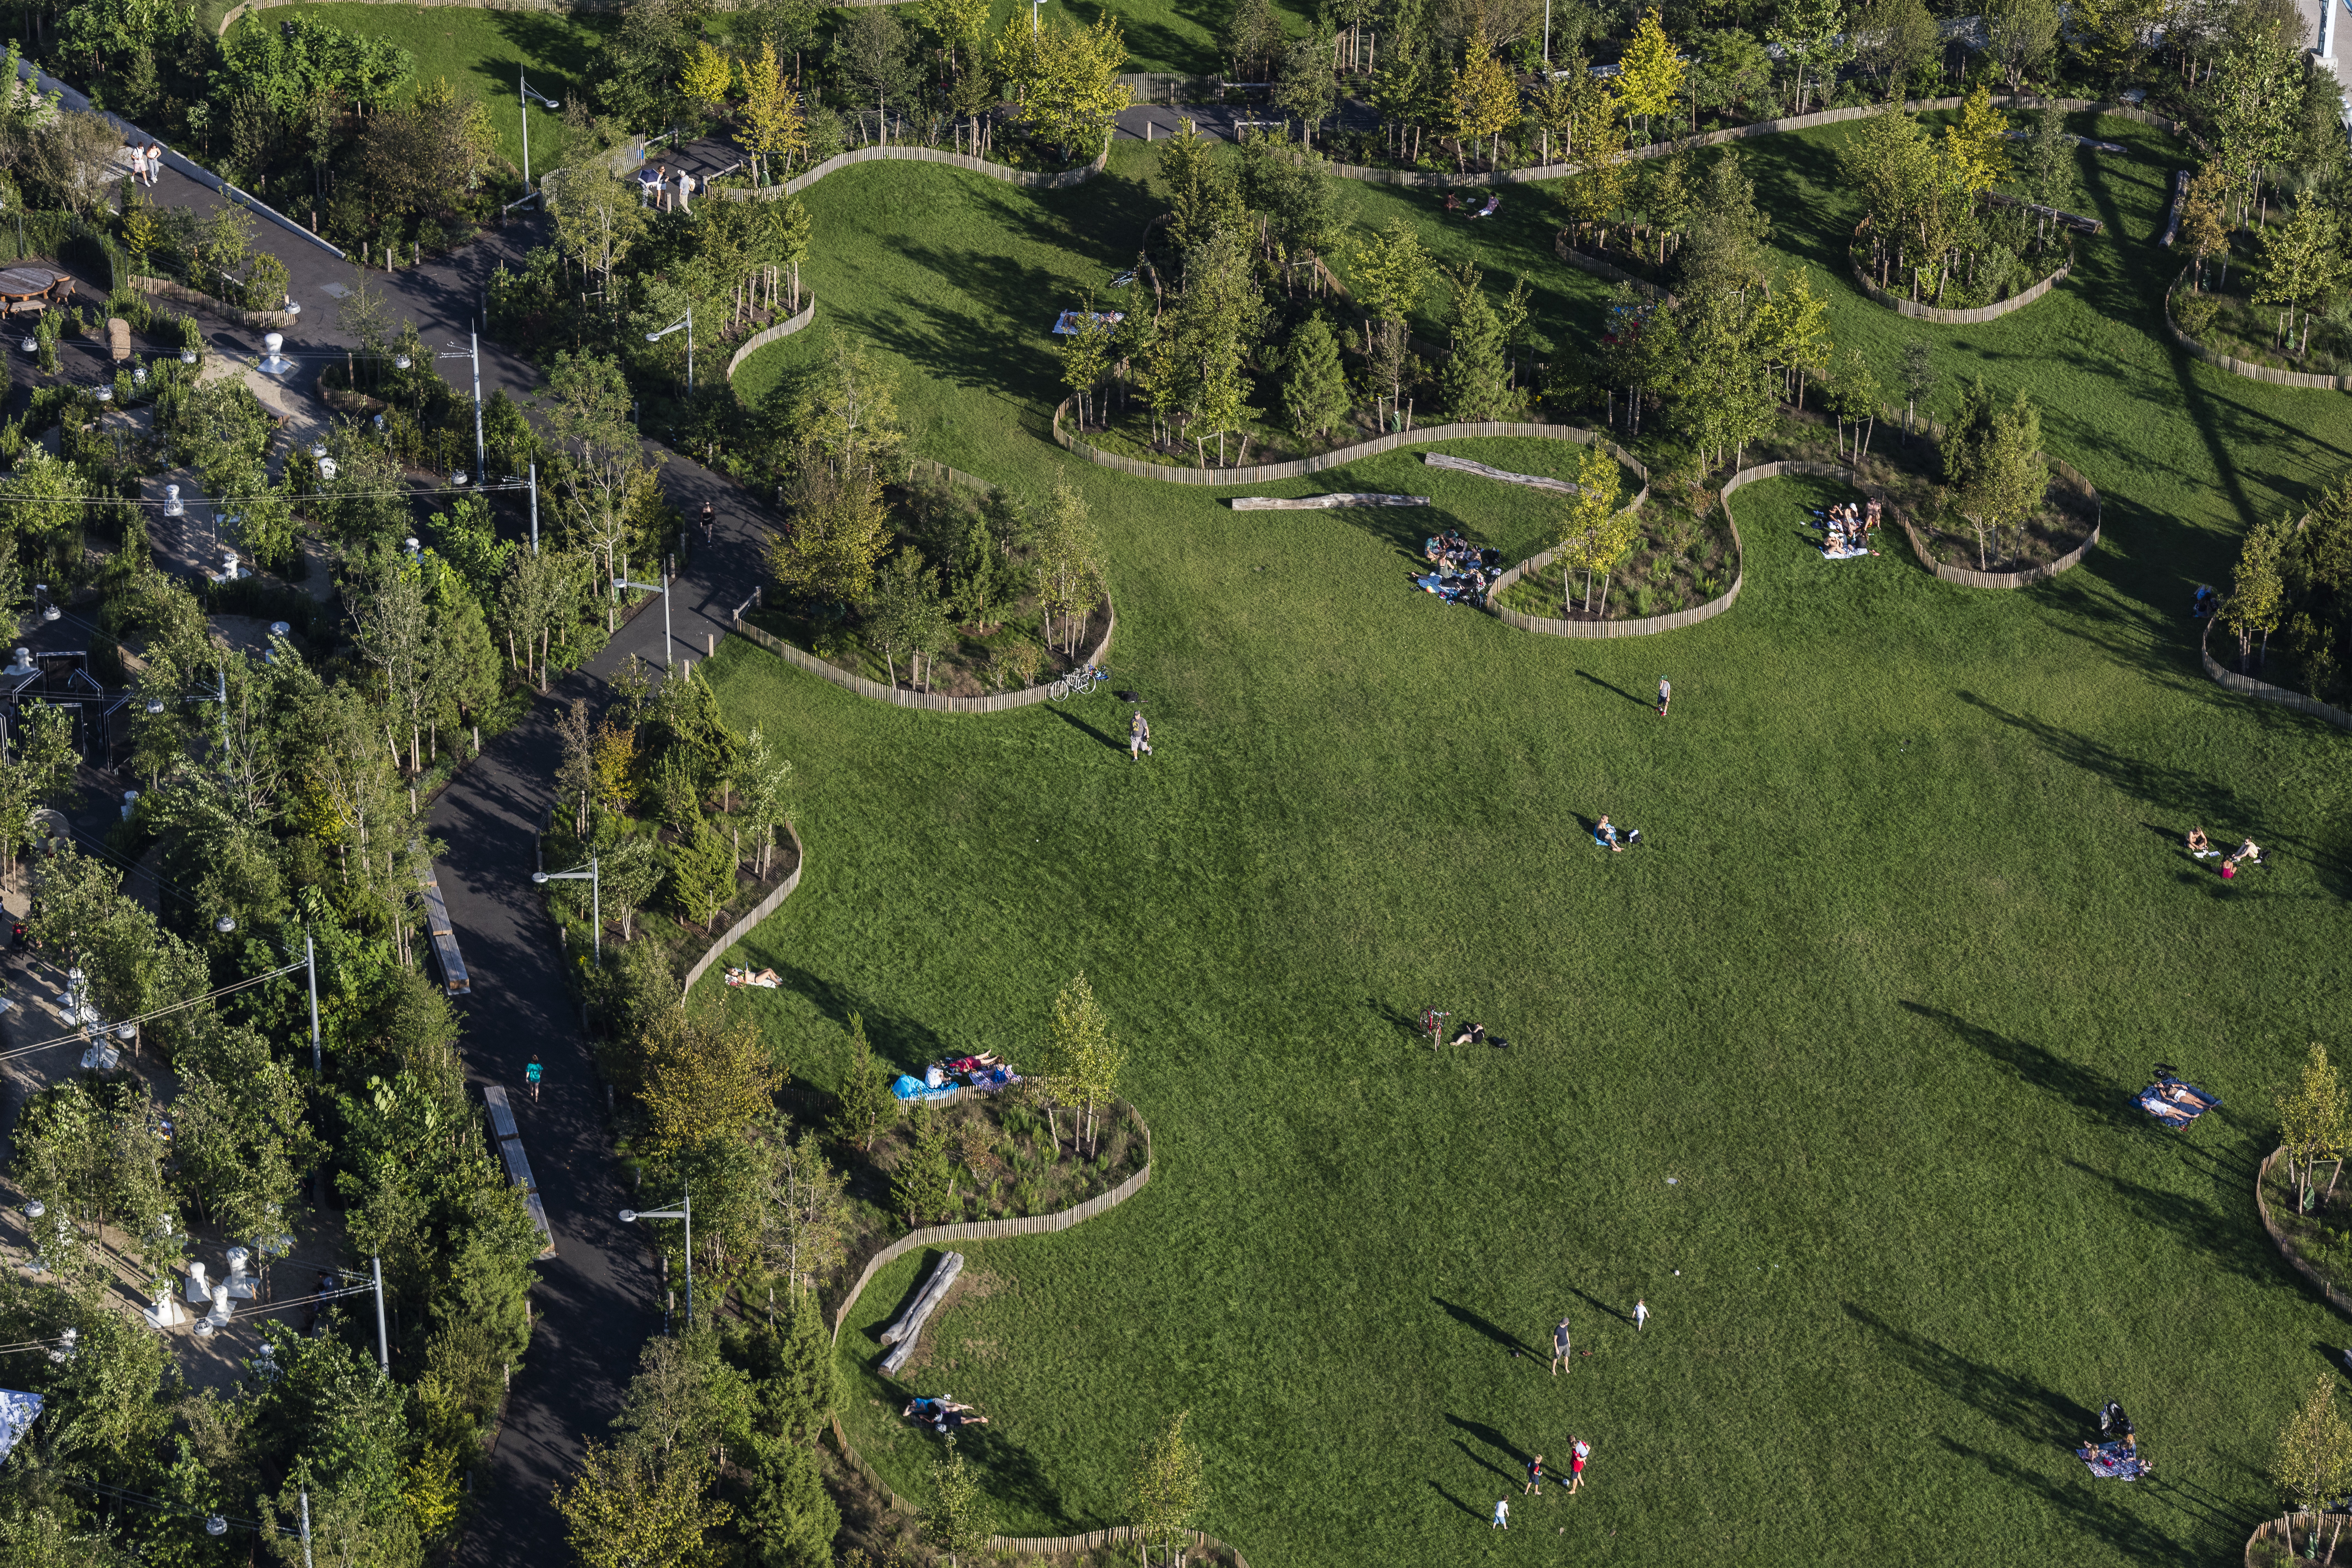 Ariel view of sunbathers in the park. Photo: Alex MacLean